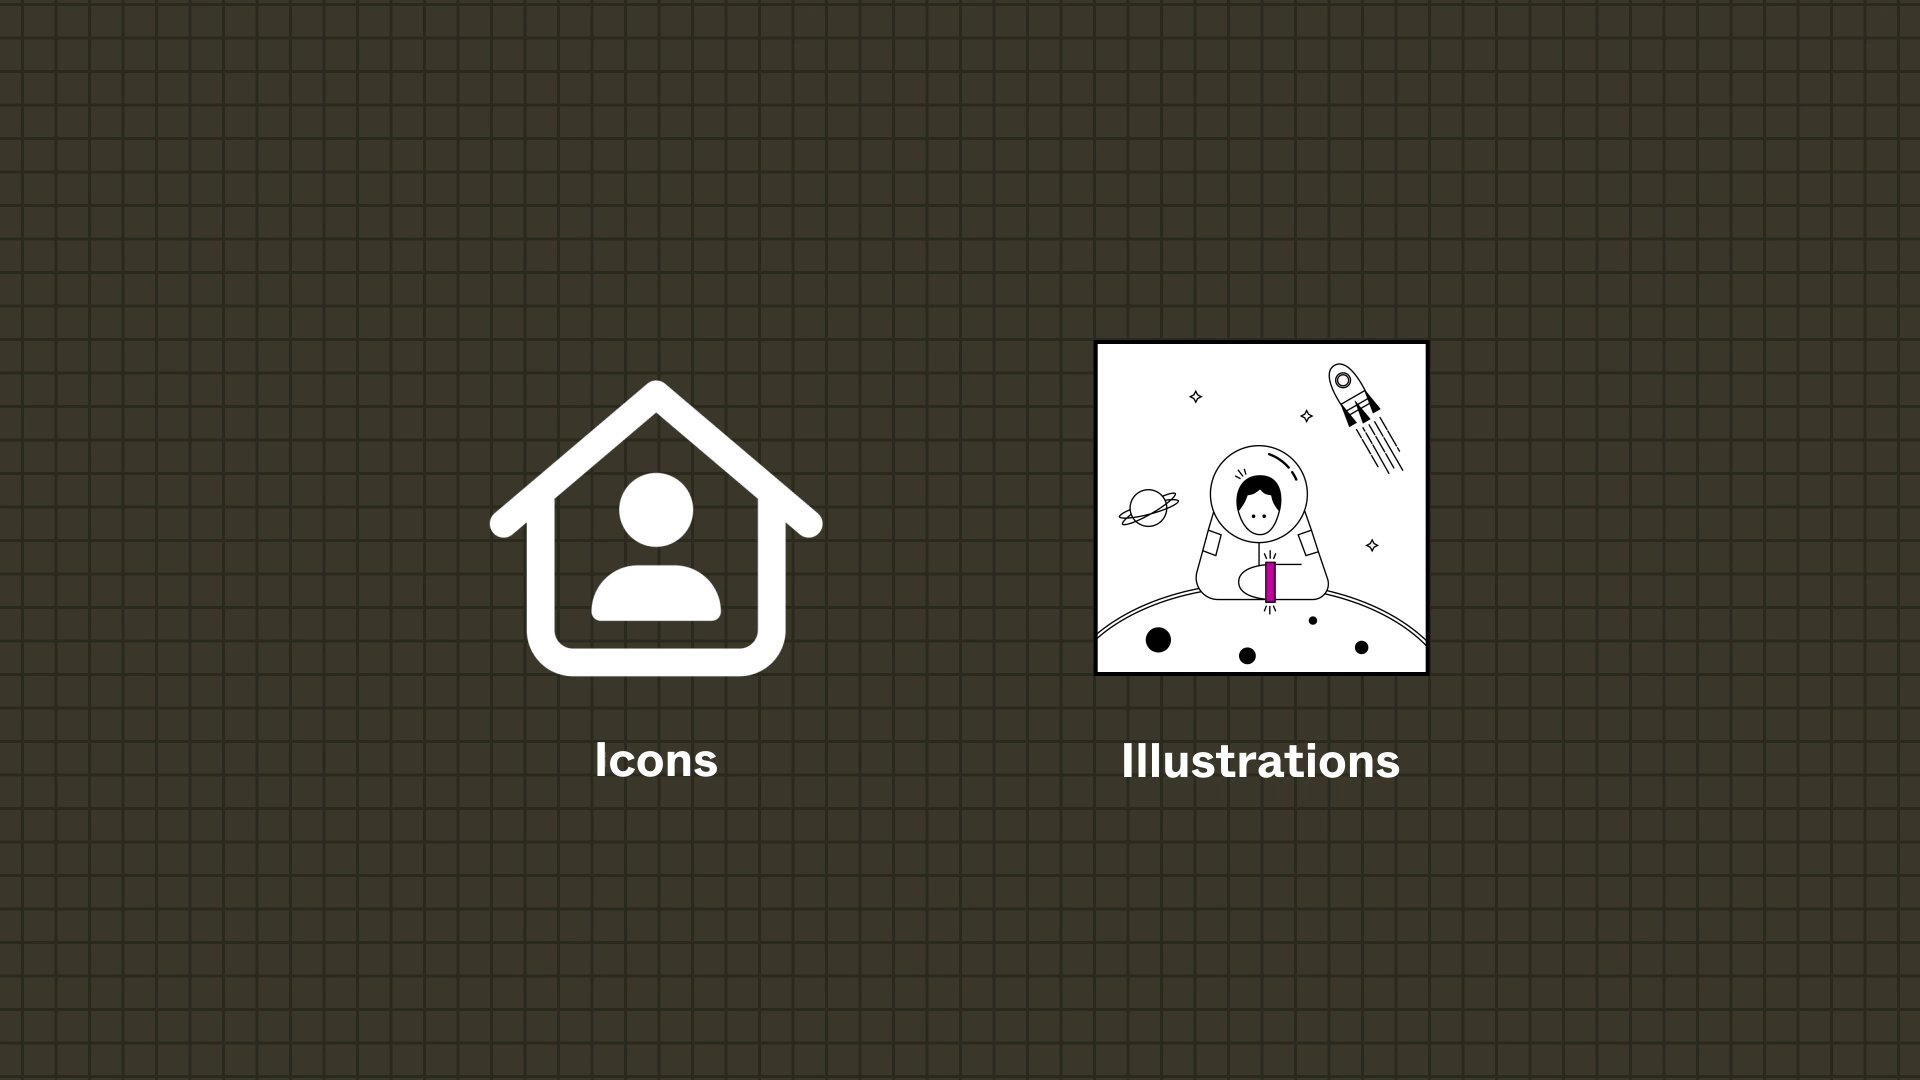 Icons_and_illustrations.png